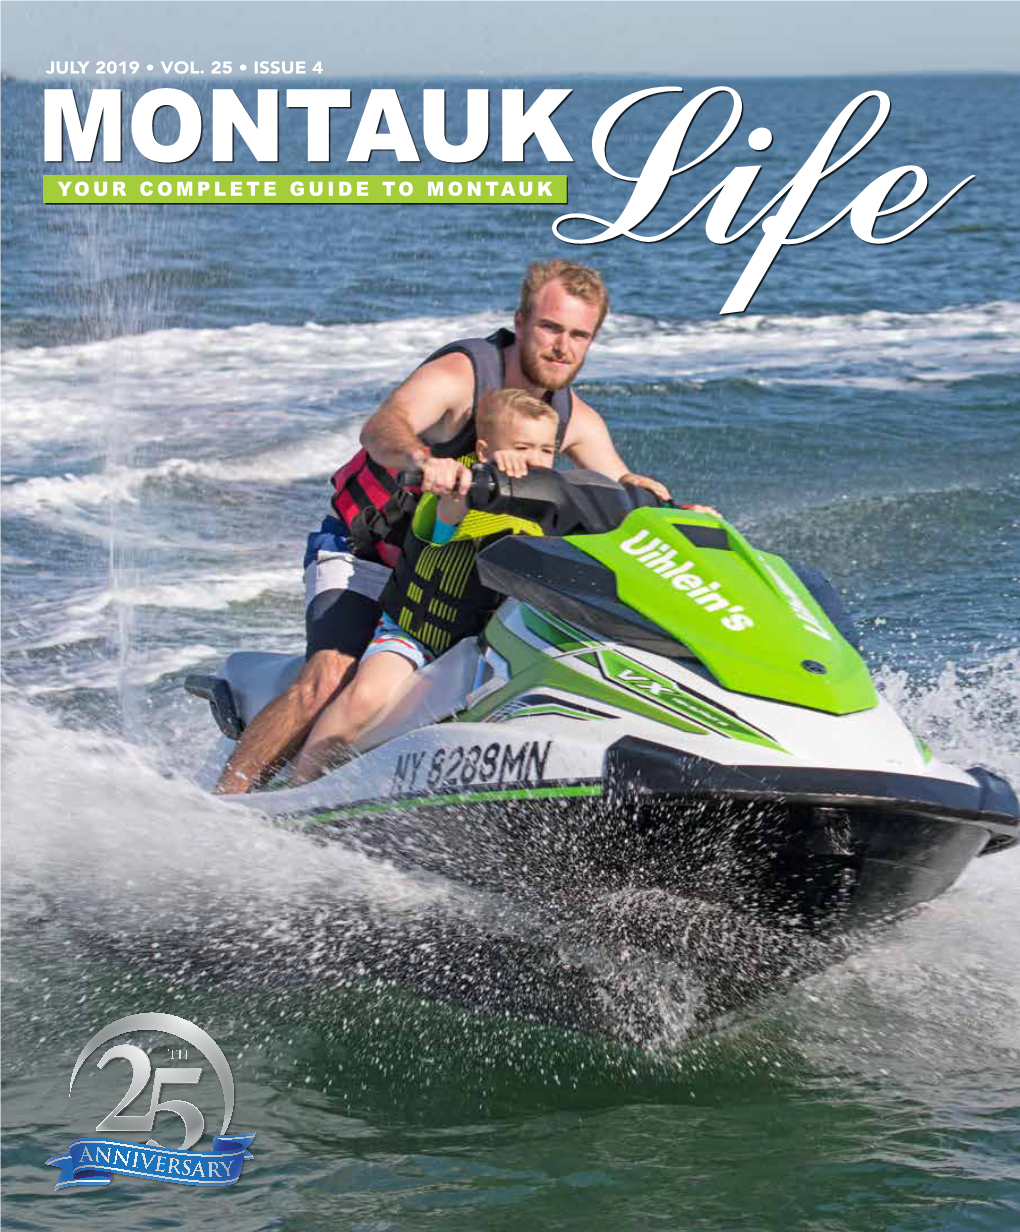 YOUR COMPLETE GUIDE to Montauklife